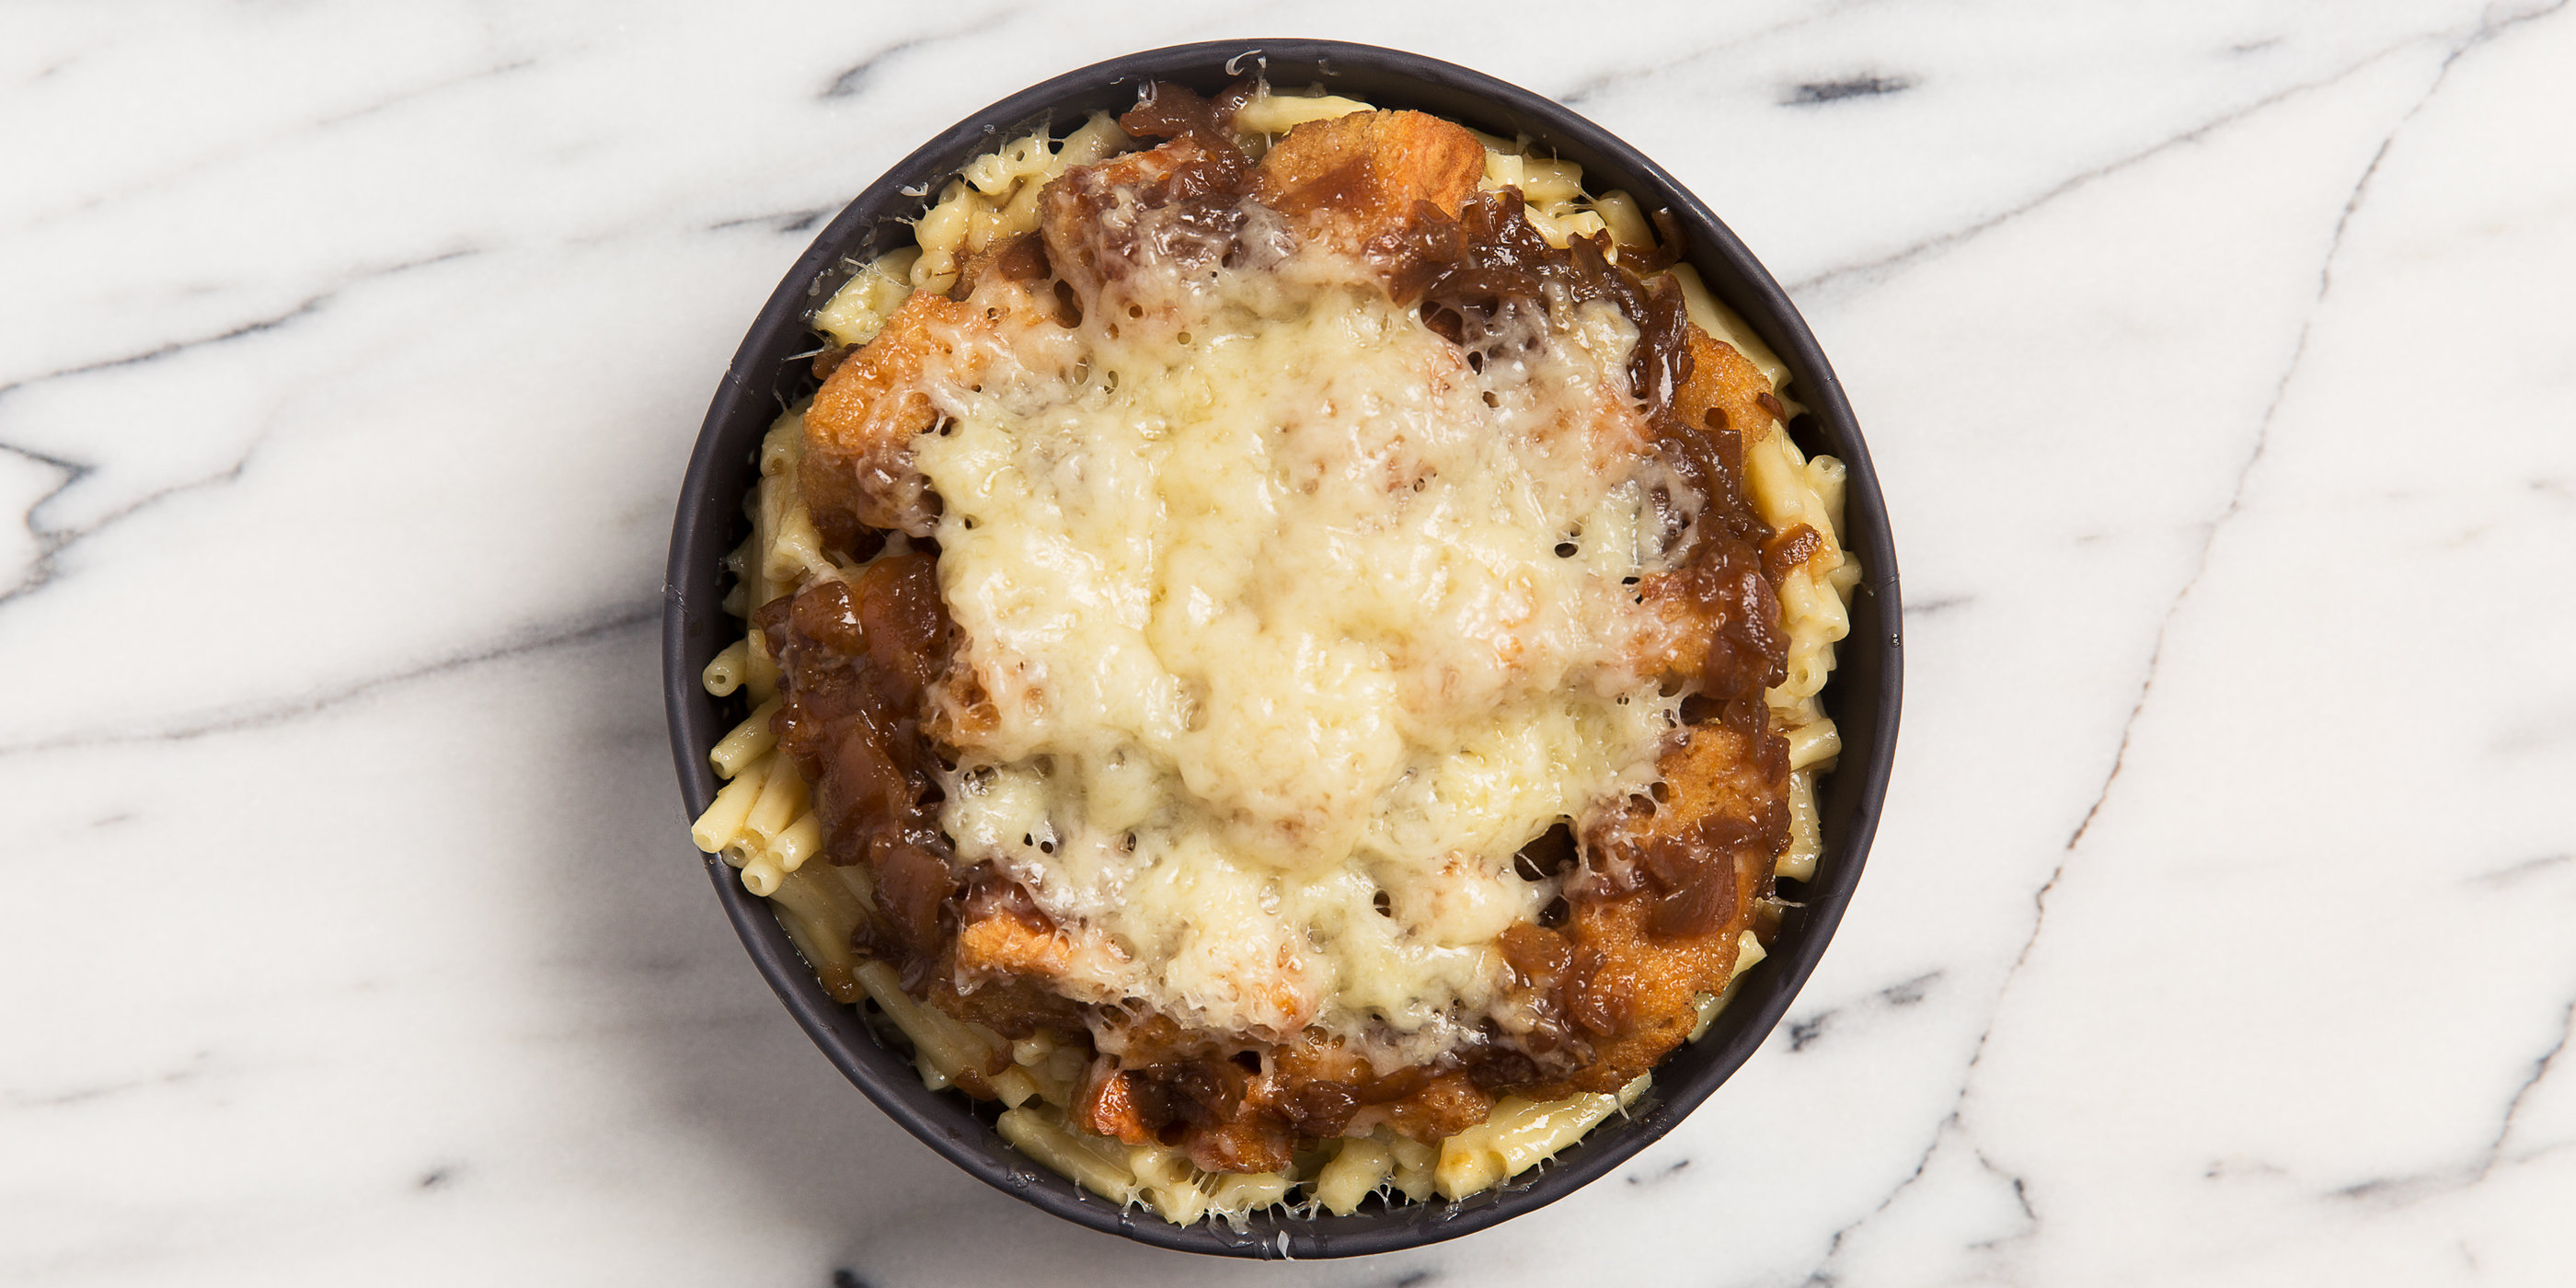 10 ways to boost your boxed macaroni and cheese for $10